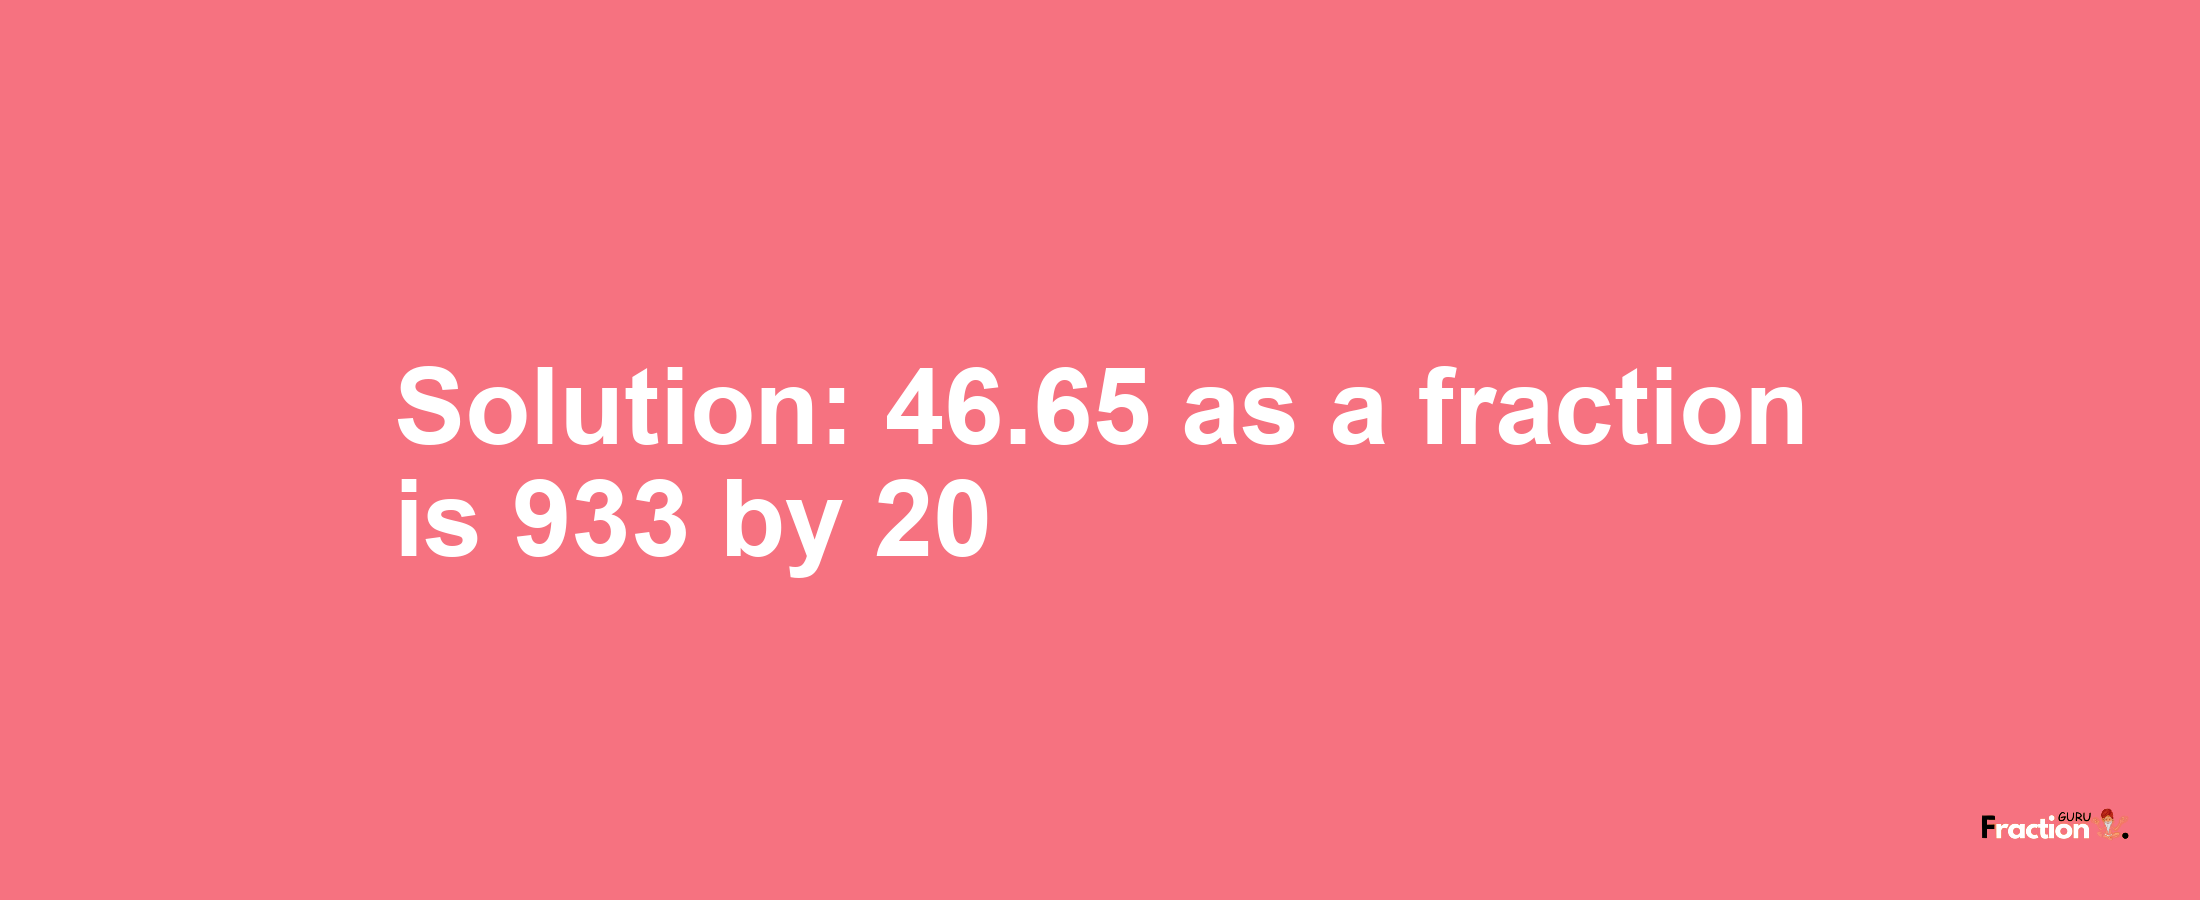 Solution:46.65 as a fraction is 933/20